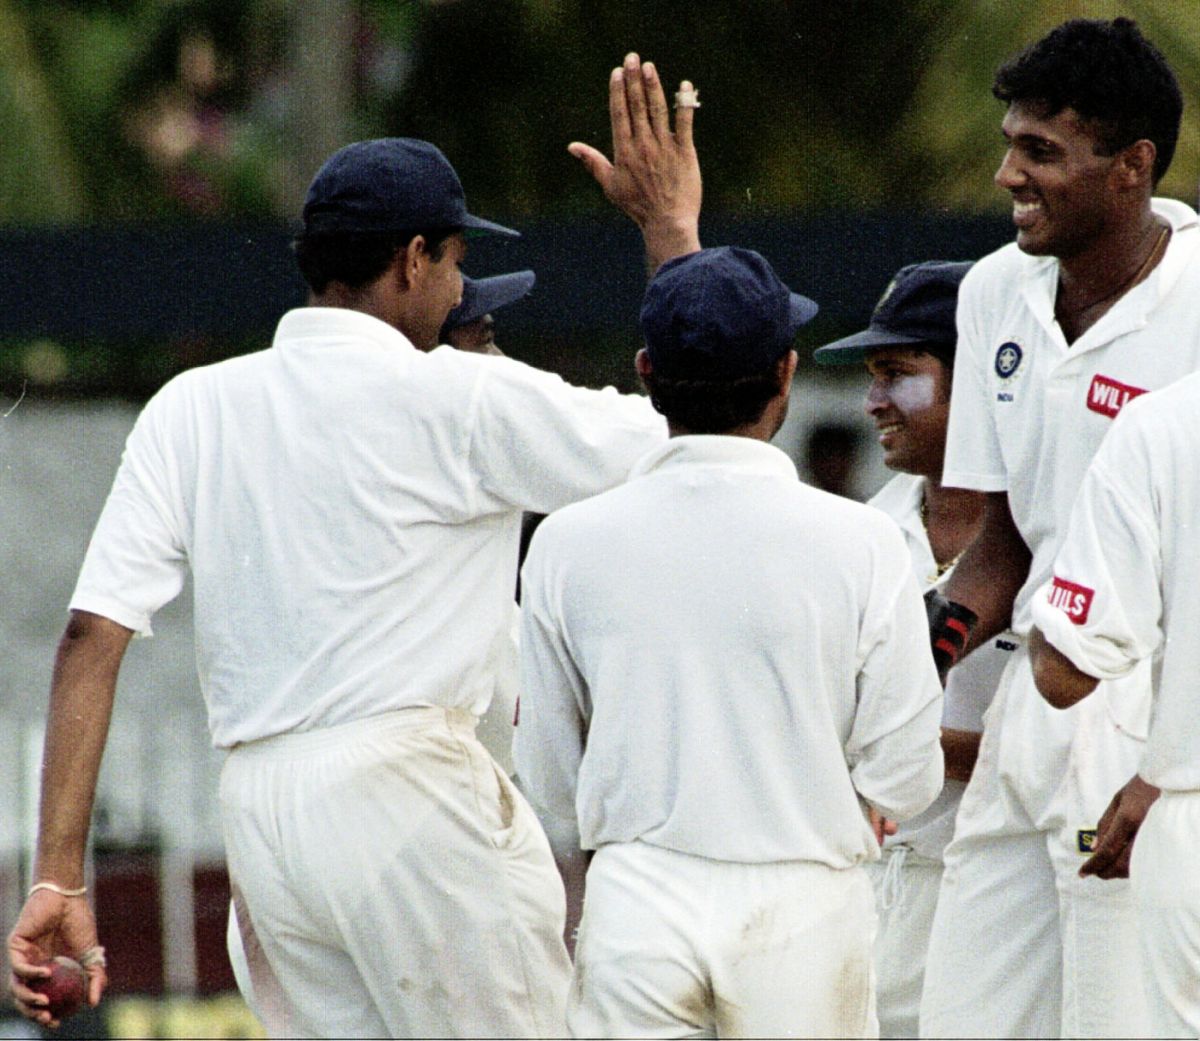 Abey Kuruvilla is congratulated by his team-mates after taking a wicket, Sri Lanka v India, 2nd Test, Colombo, 4th day, August 12, 1997